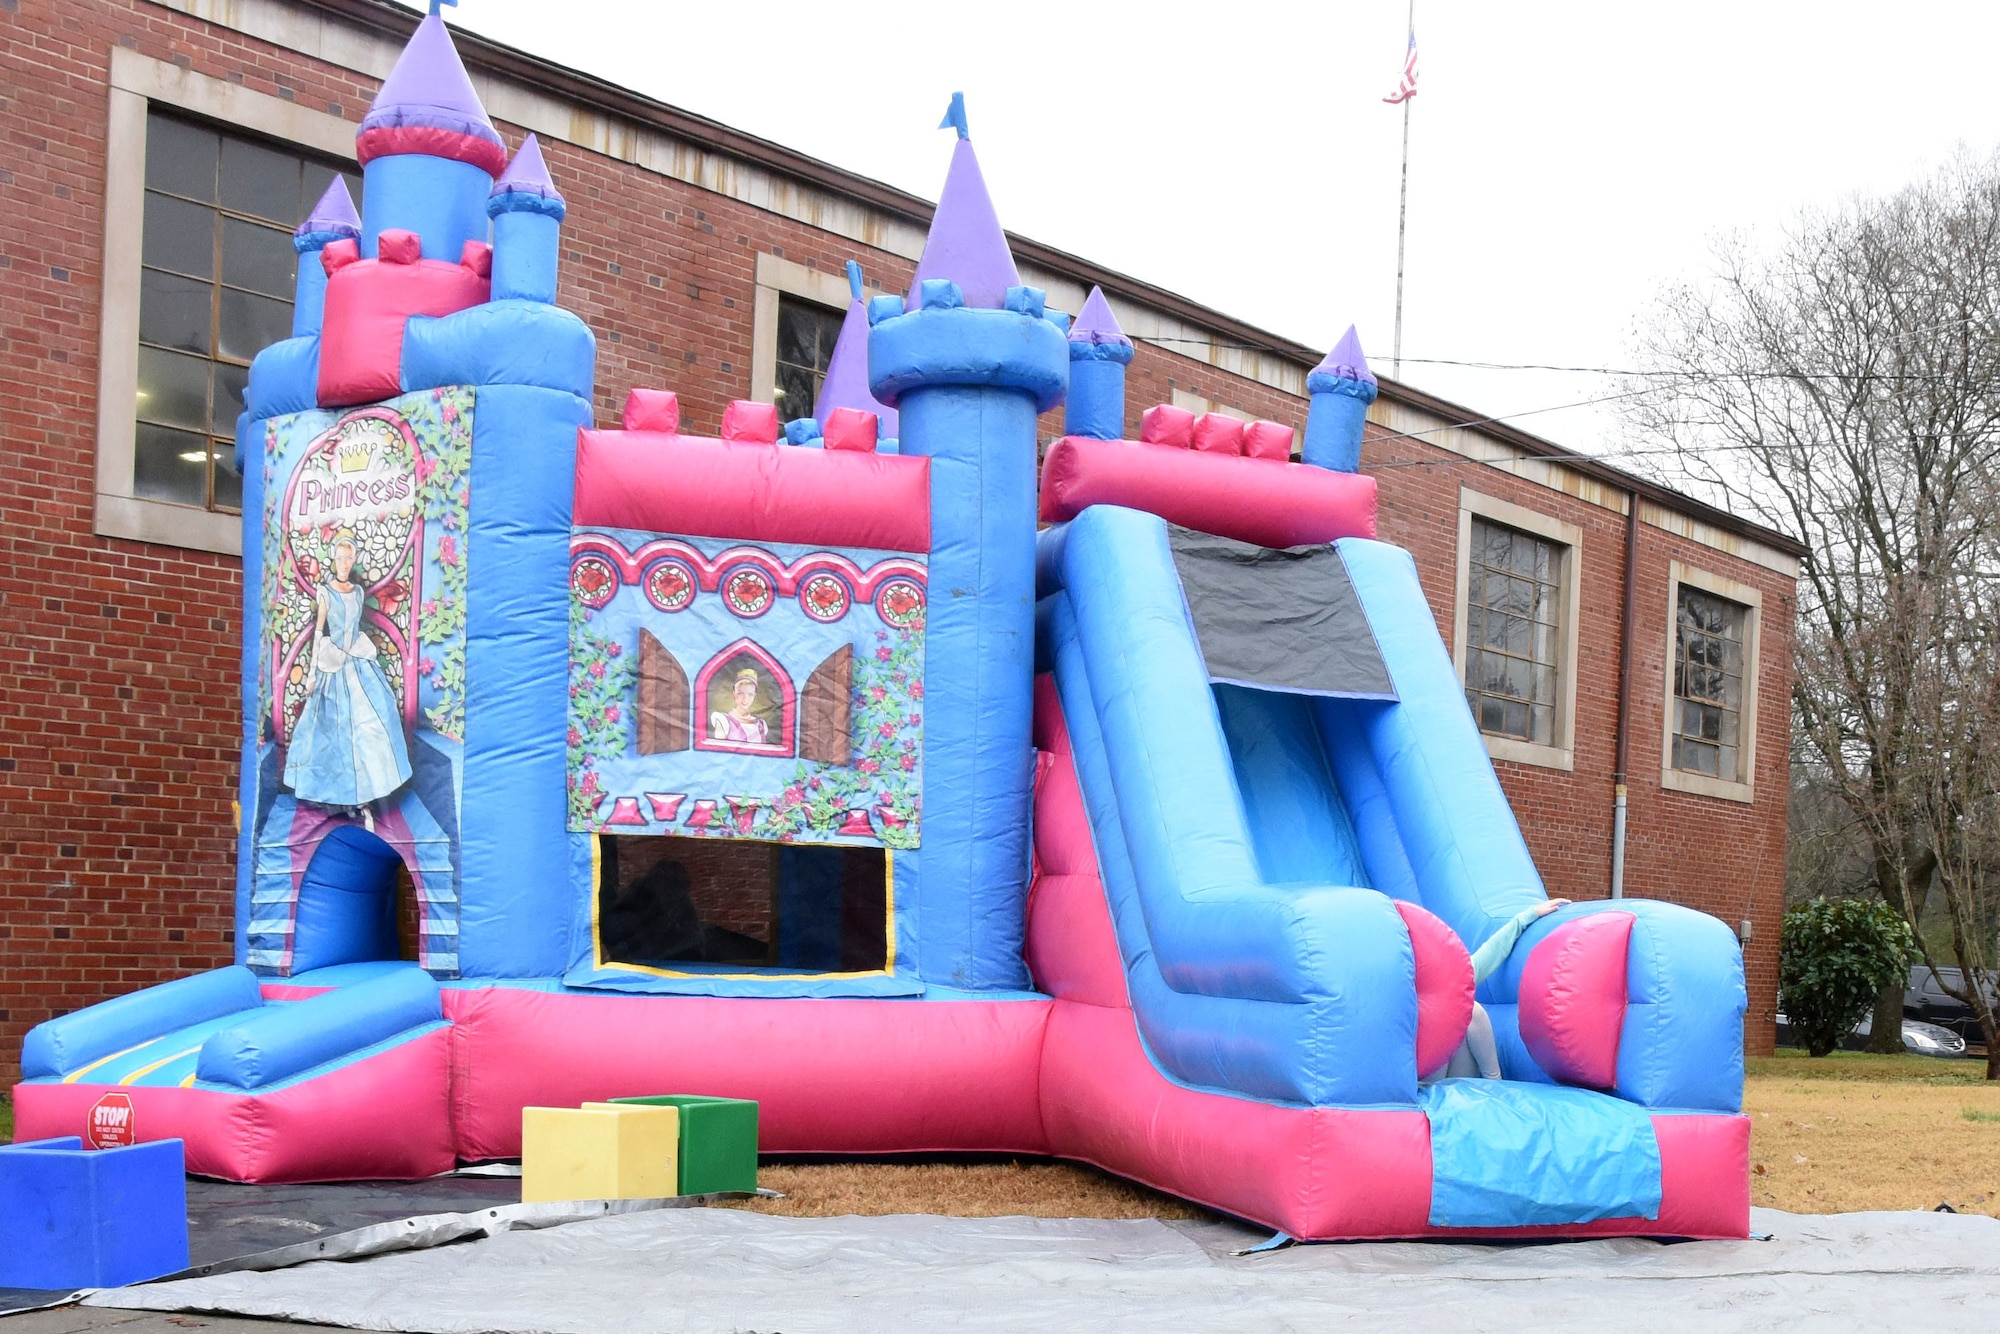 A princess bouncy castle is put to use at Badin Elementary School (B.E.S.) during Operation Santa held at B.E.S., Badin, N.C., Dec. 14th, 2019.  Operation Santa is an annual event run by the Chapter 7 organization of the North Carolina Air National Guard (NCANG) which chooses select schools to provide assistance to families during the holiday season. This year, the NCANG provided presents, lunch, music, bouncy castles and a Santa. The NCANG also partnered with the local Target for food donations.